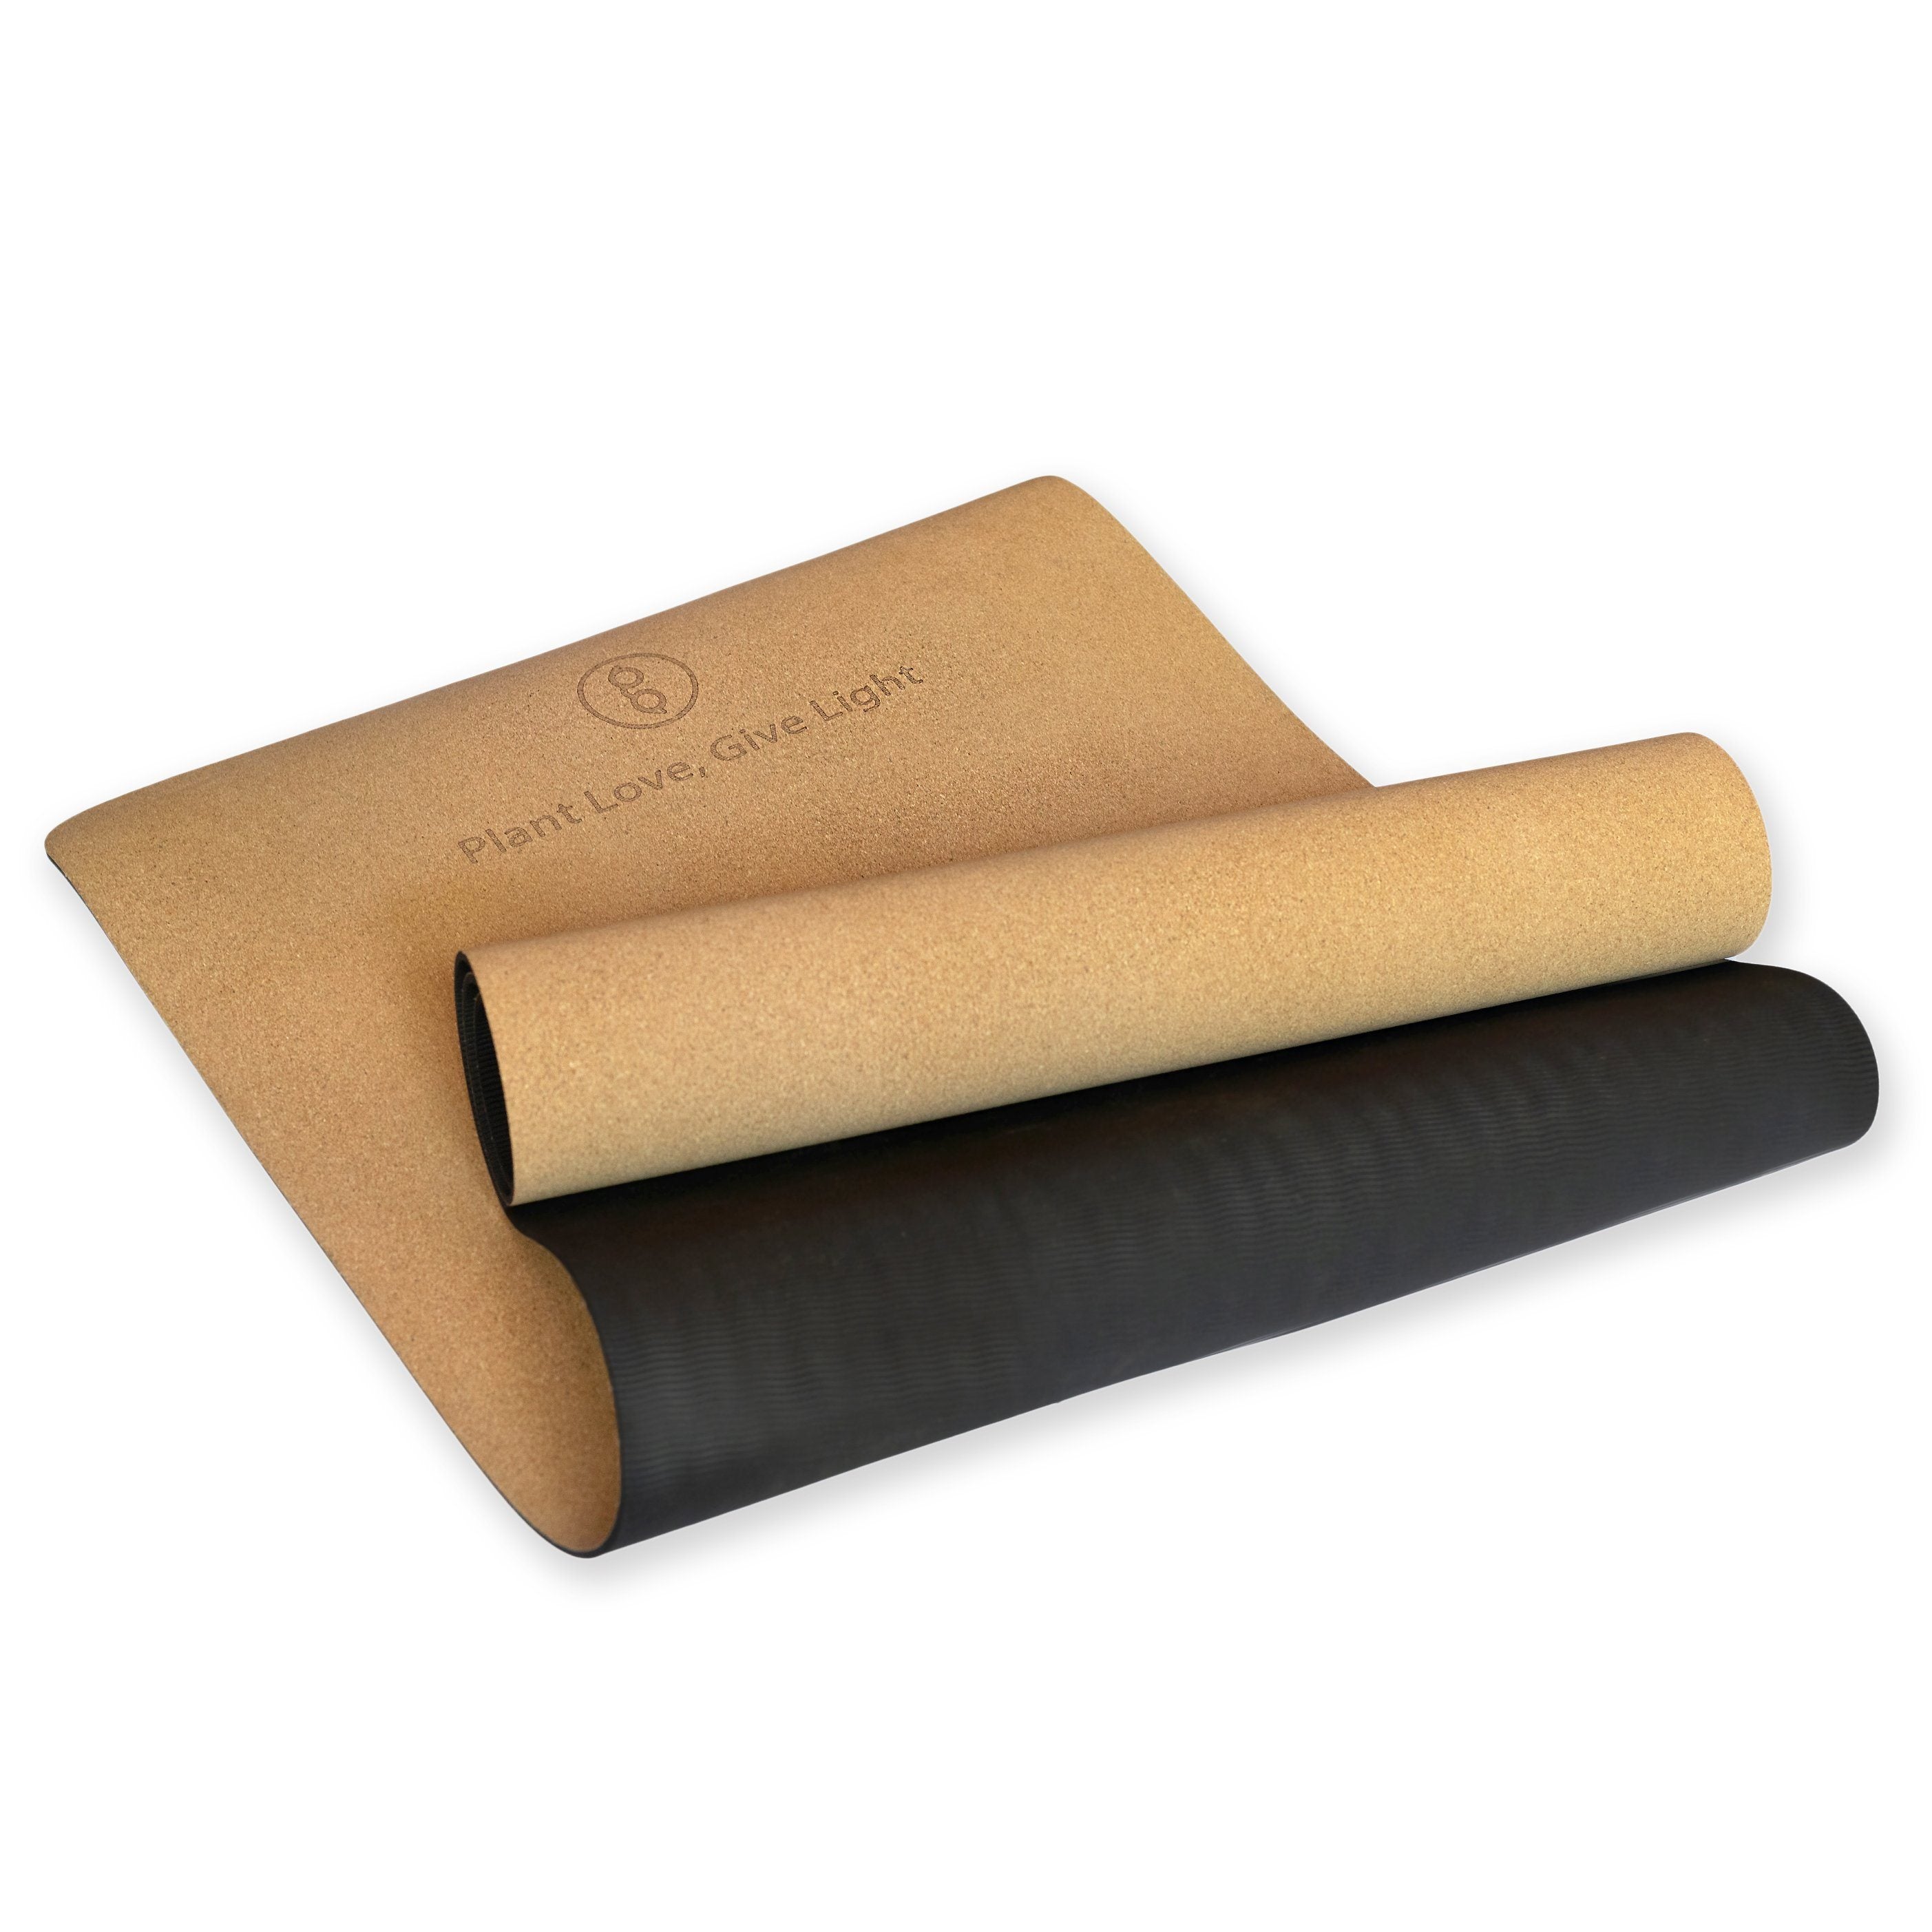 Roots Cork Yoga Mat - sustainability meets function flawlessly. – ilovegurus